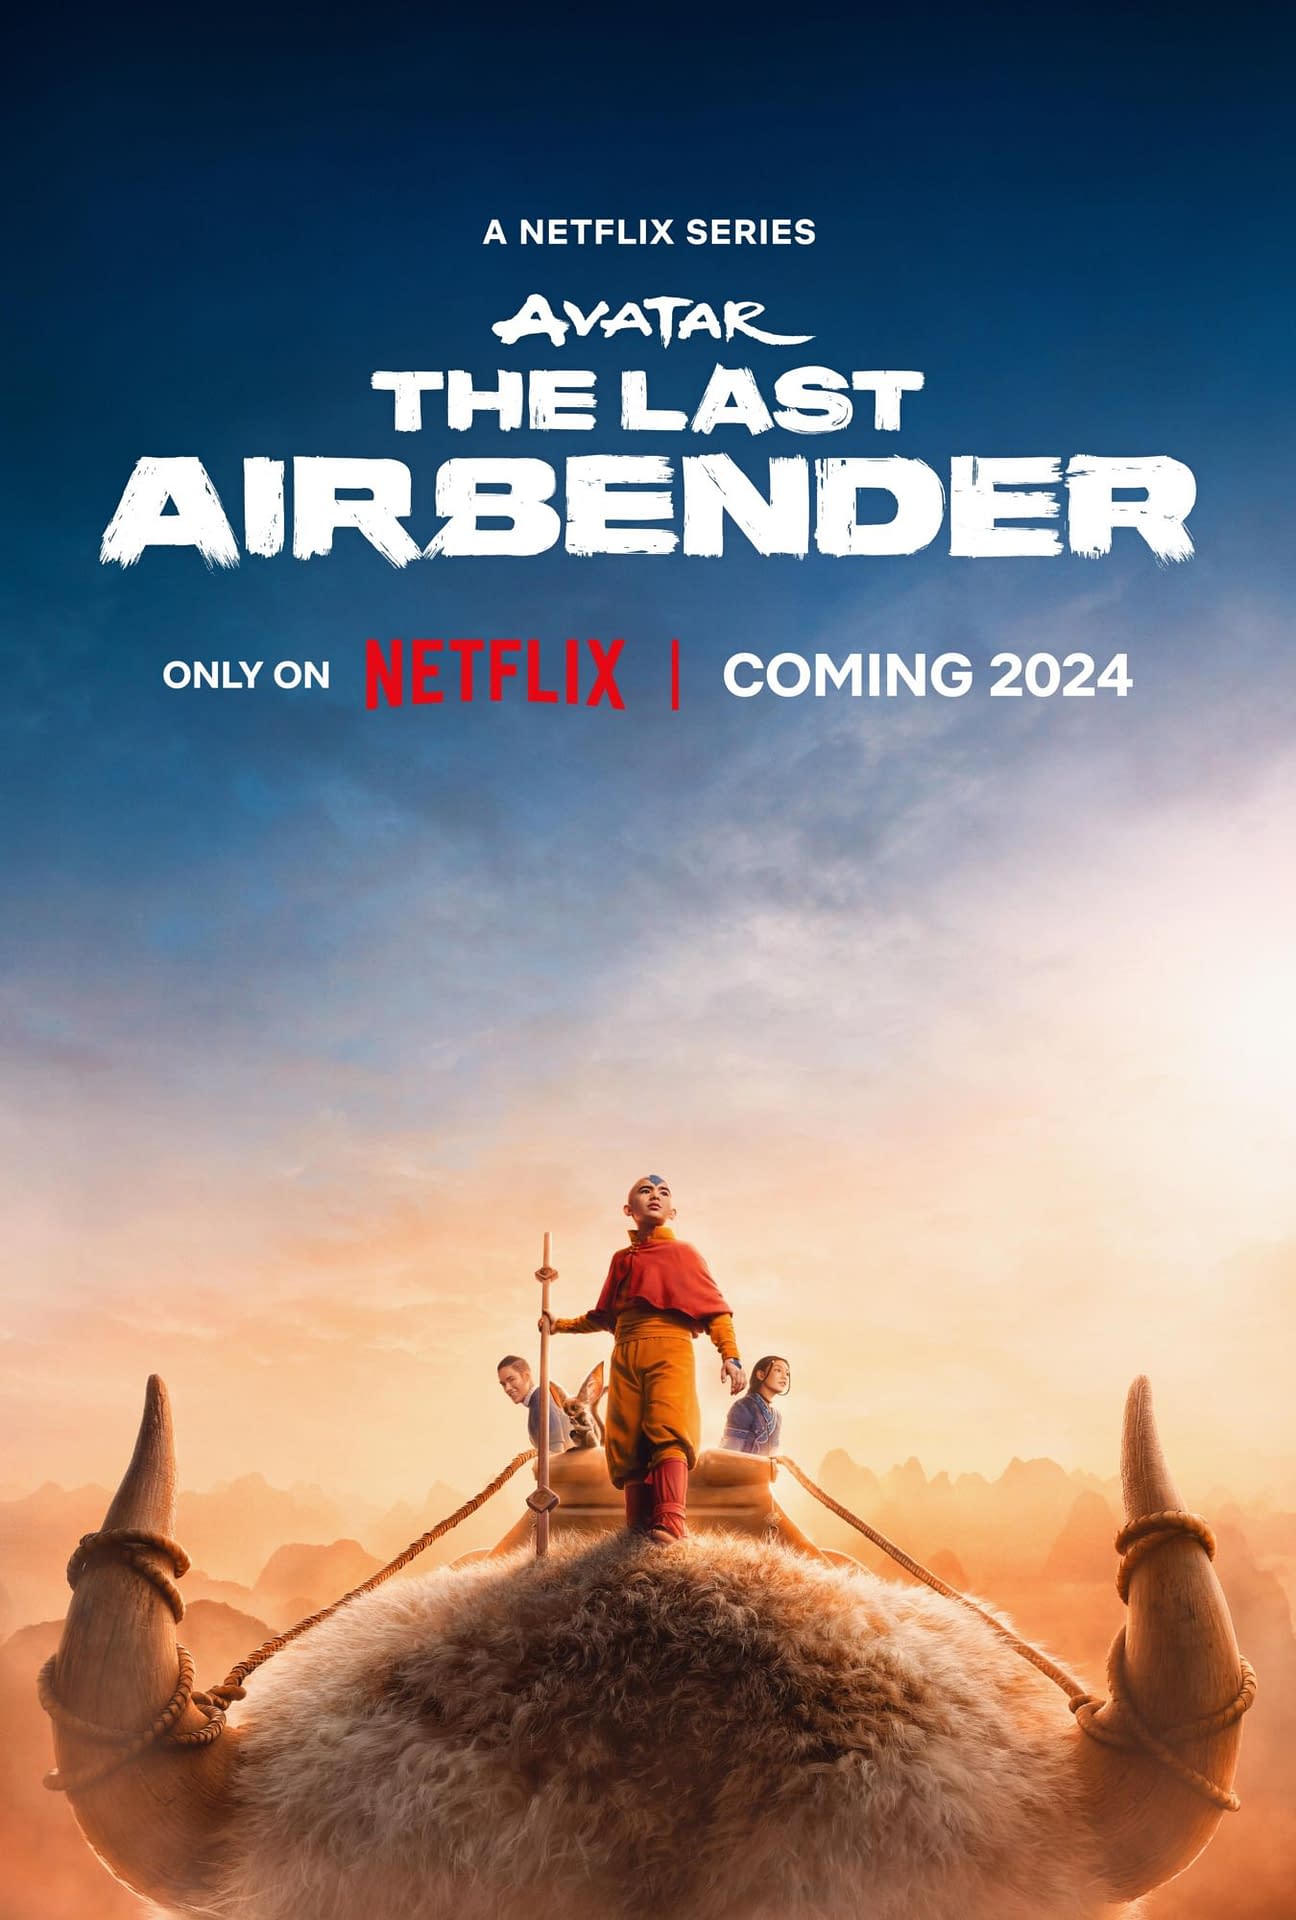 Avatar The Last Airbender Poster Aang's Journey Is Just Beginning